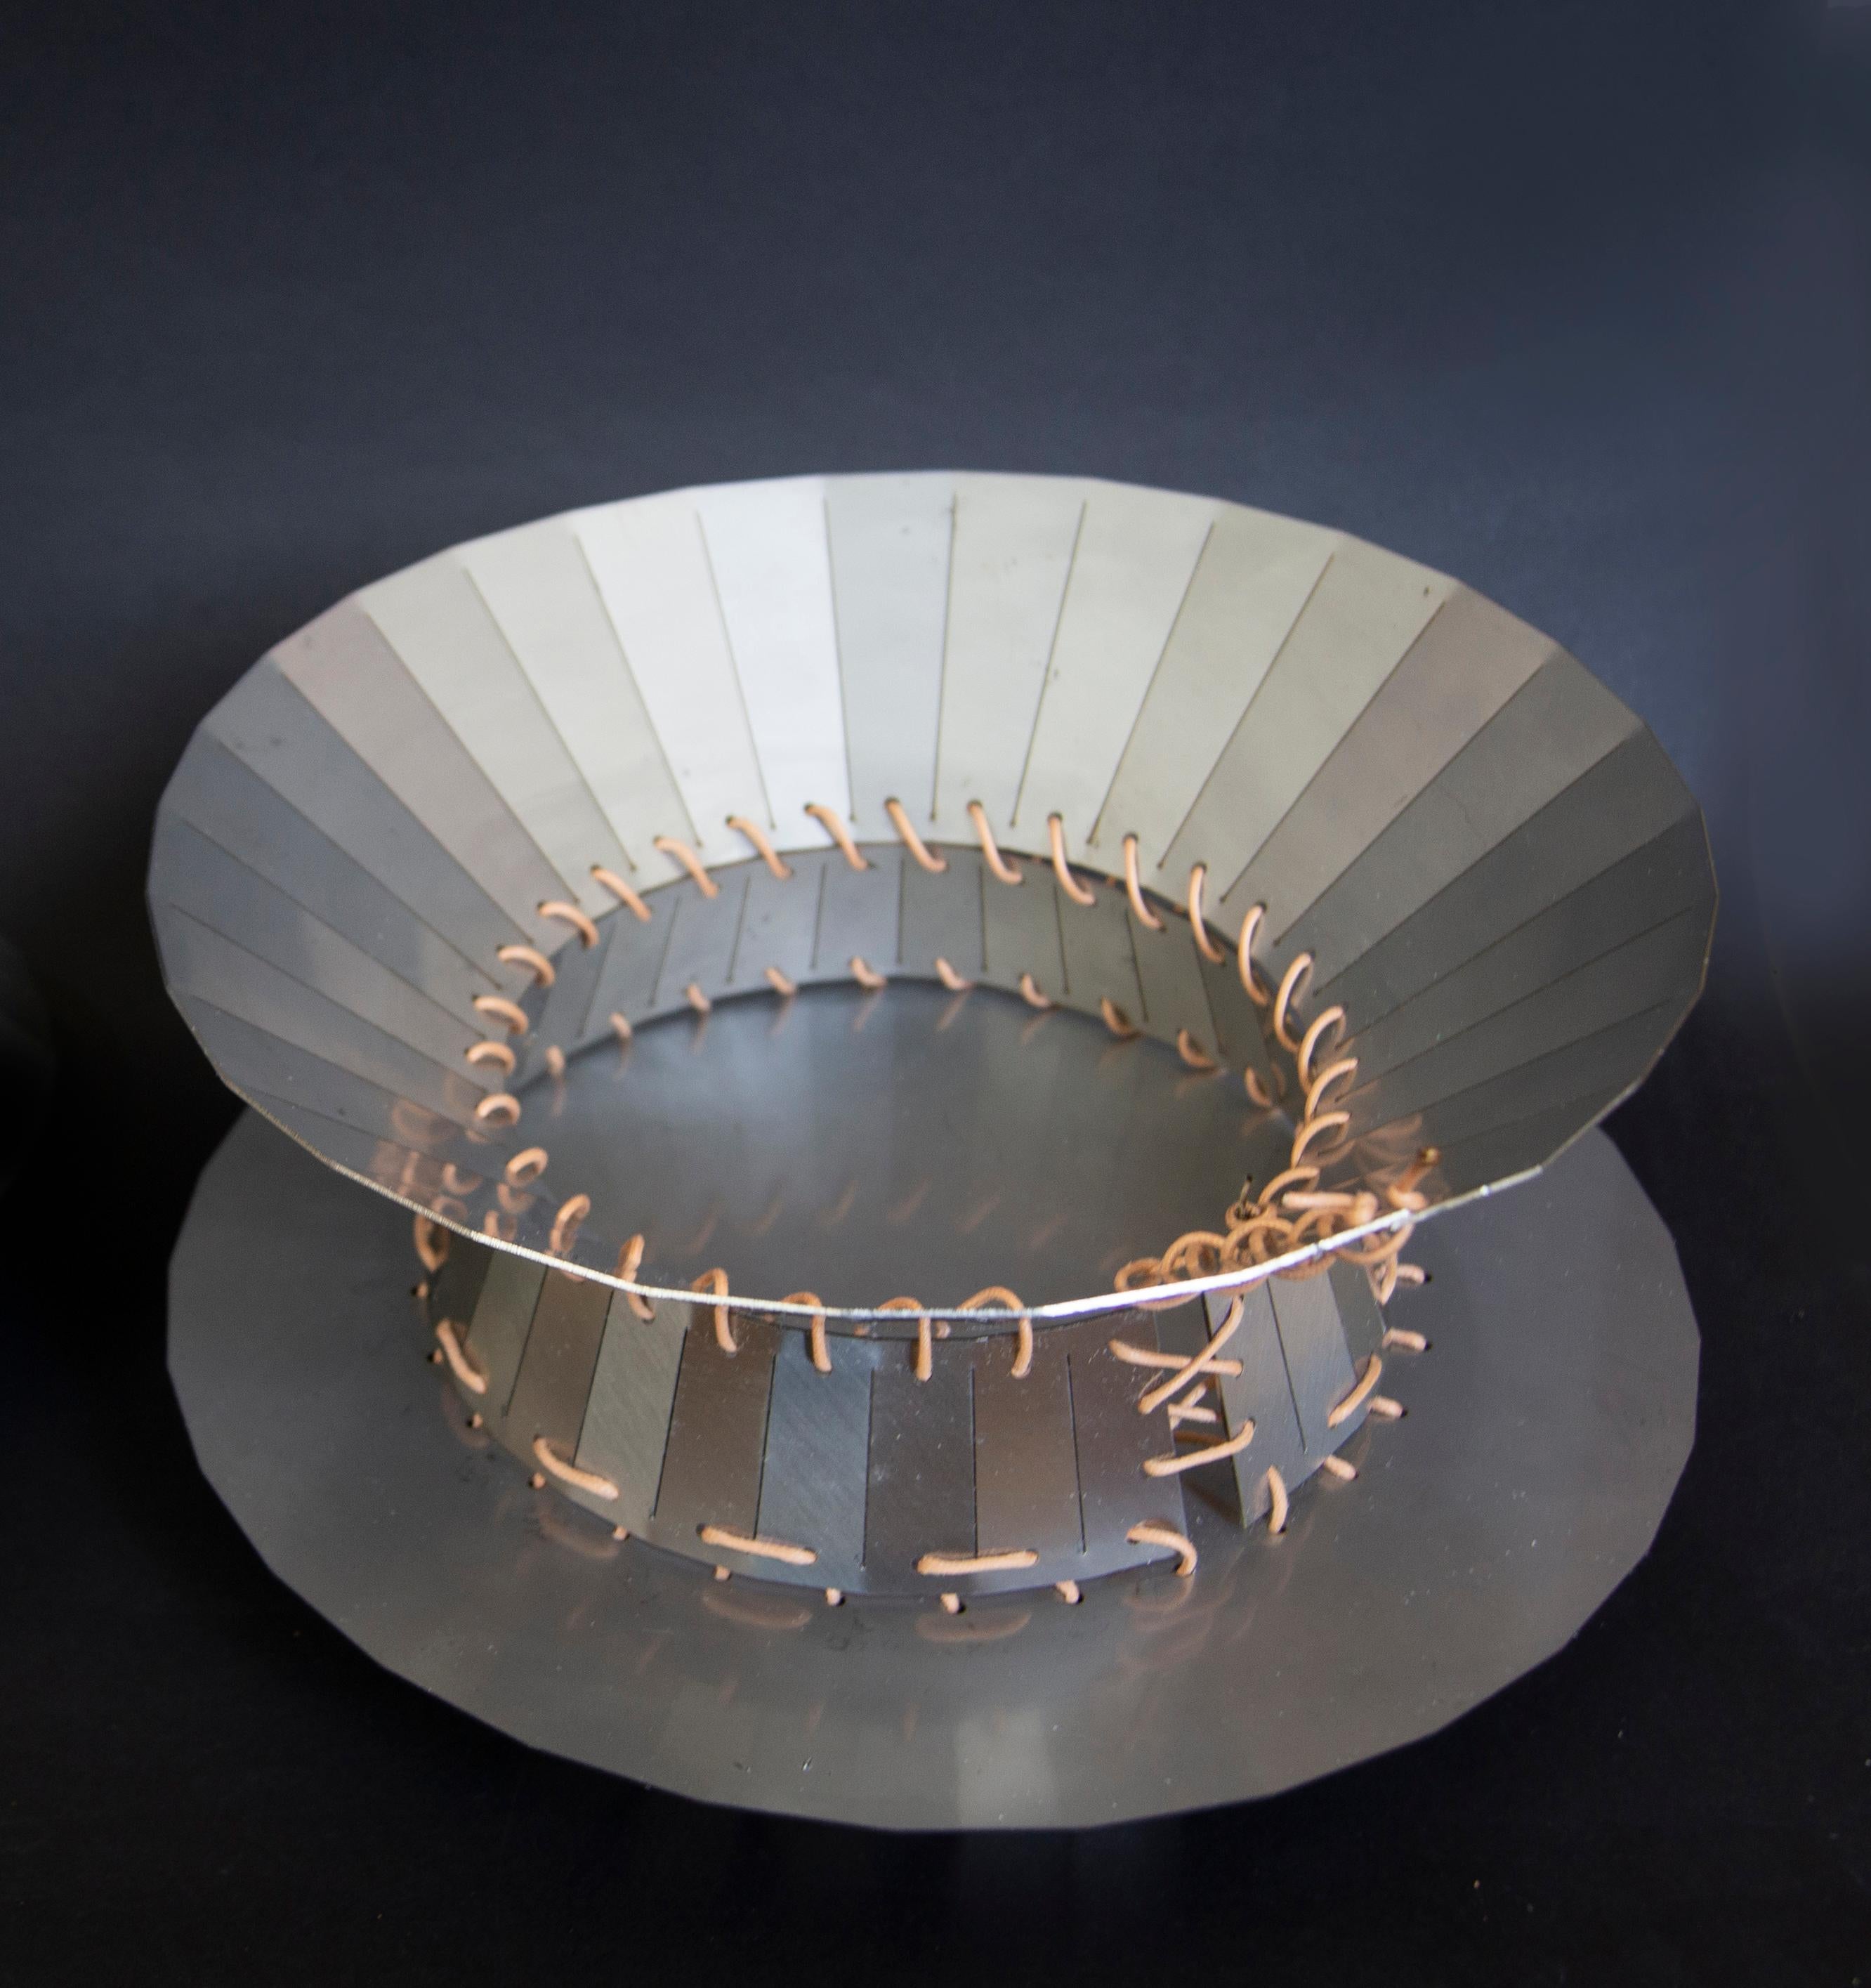 Post-Modern Contemporary Centerpiece in Stainless Steel Design Piece - Cream strings For Sale